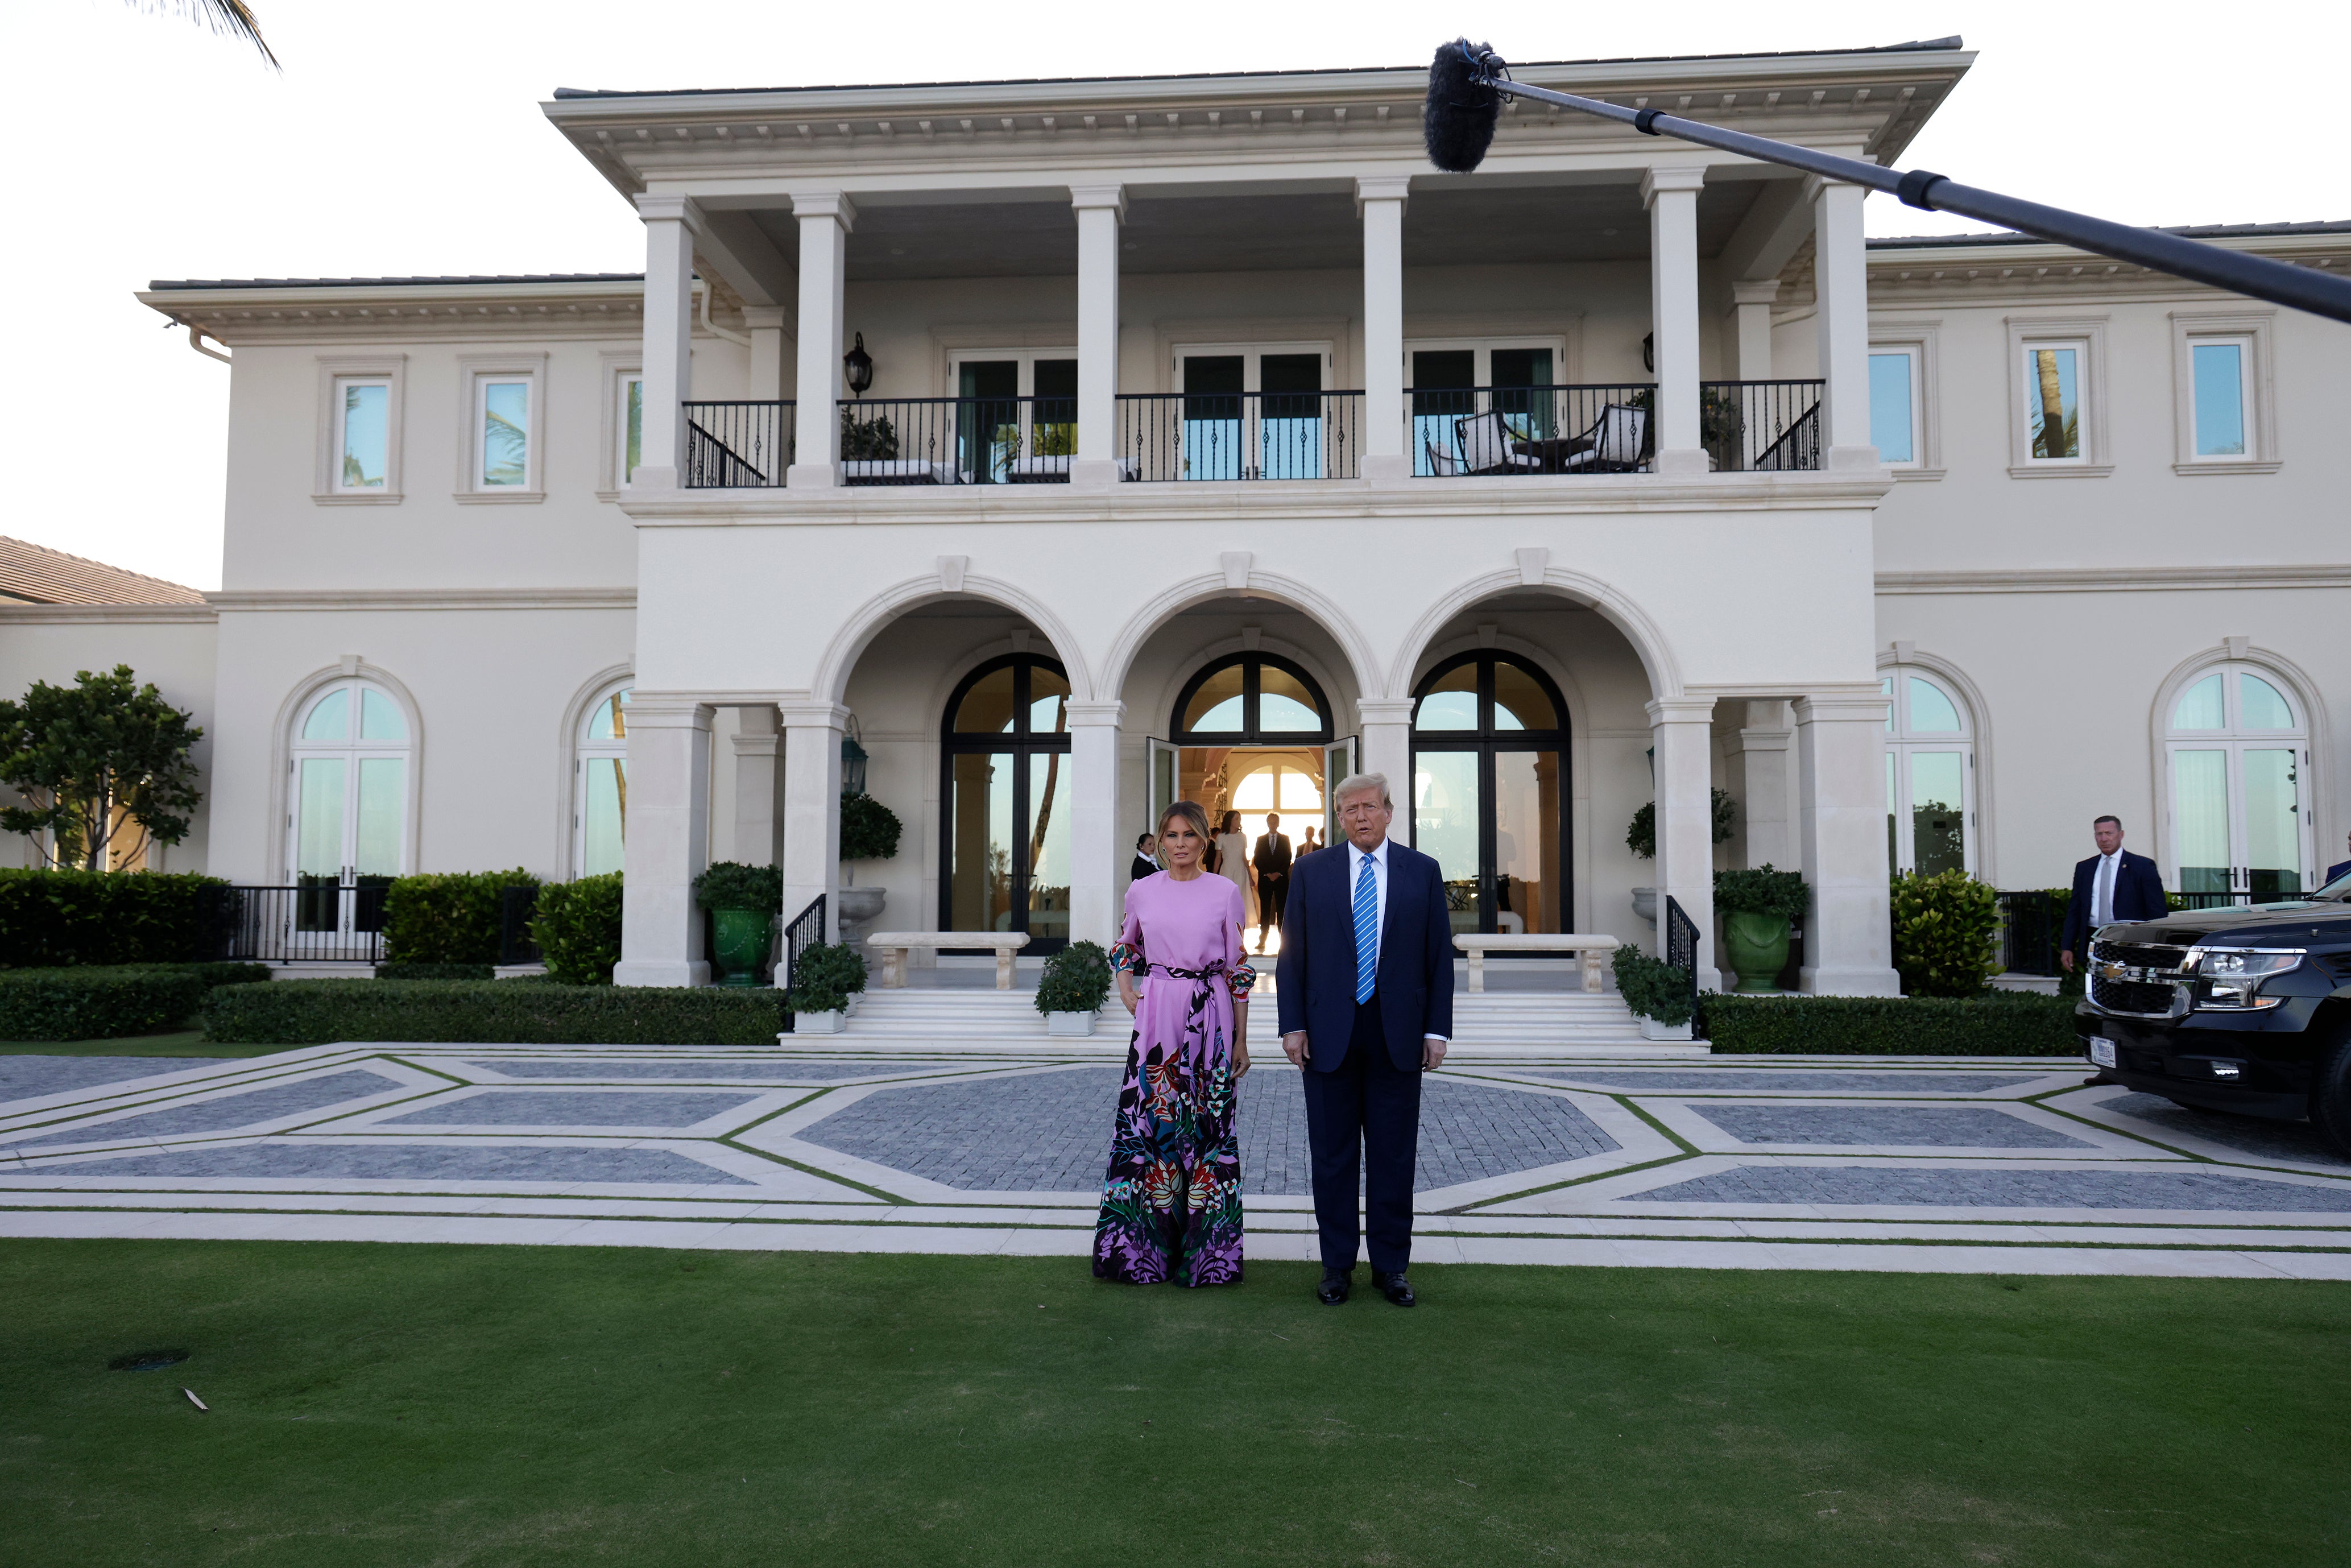 Donald and Melania Trump pictured on Saturday at the home of hedgefund manager John Paulson in Palm Beach during a fundraiser